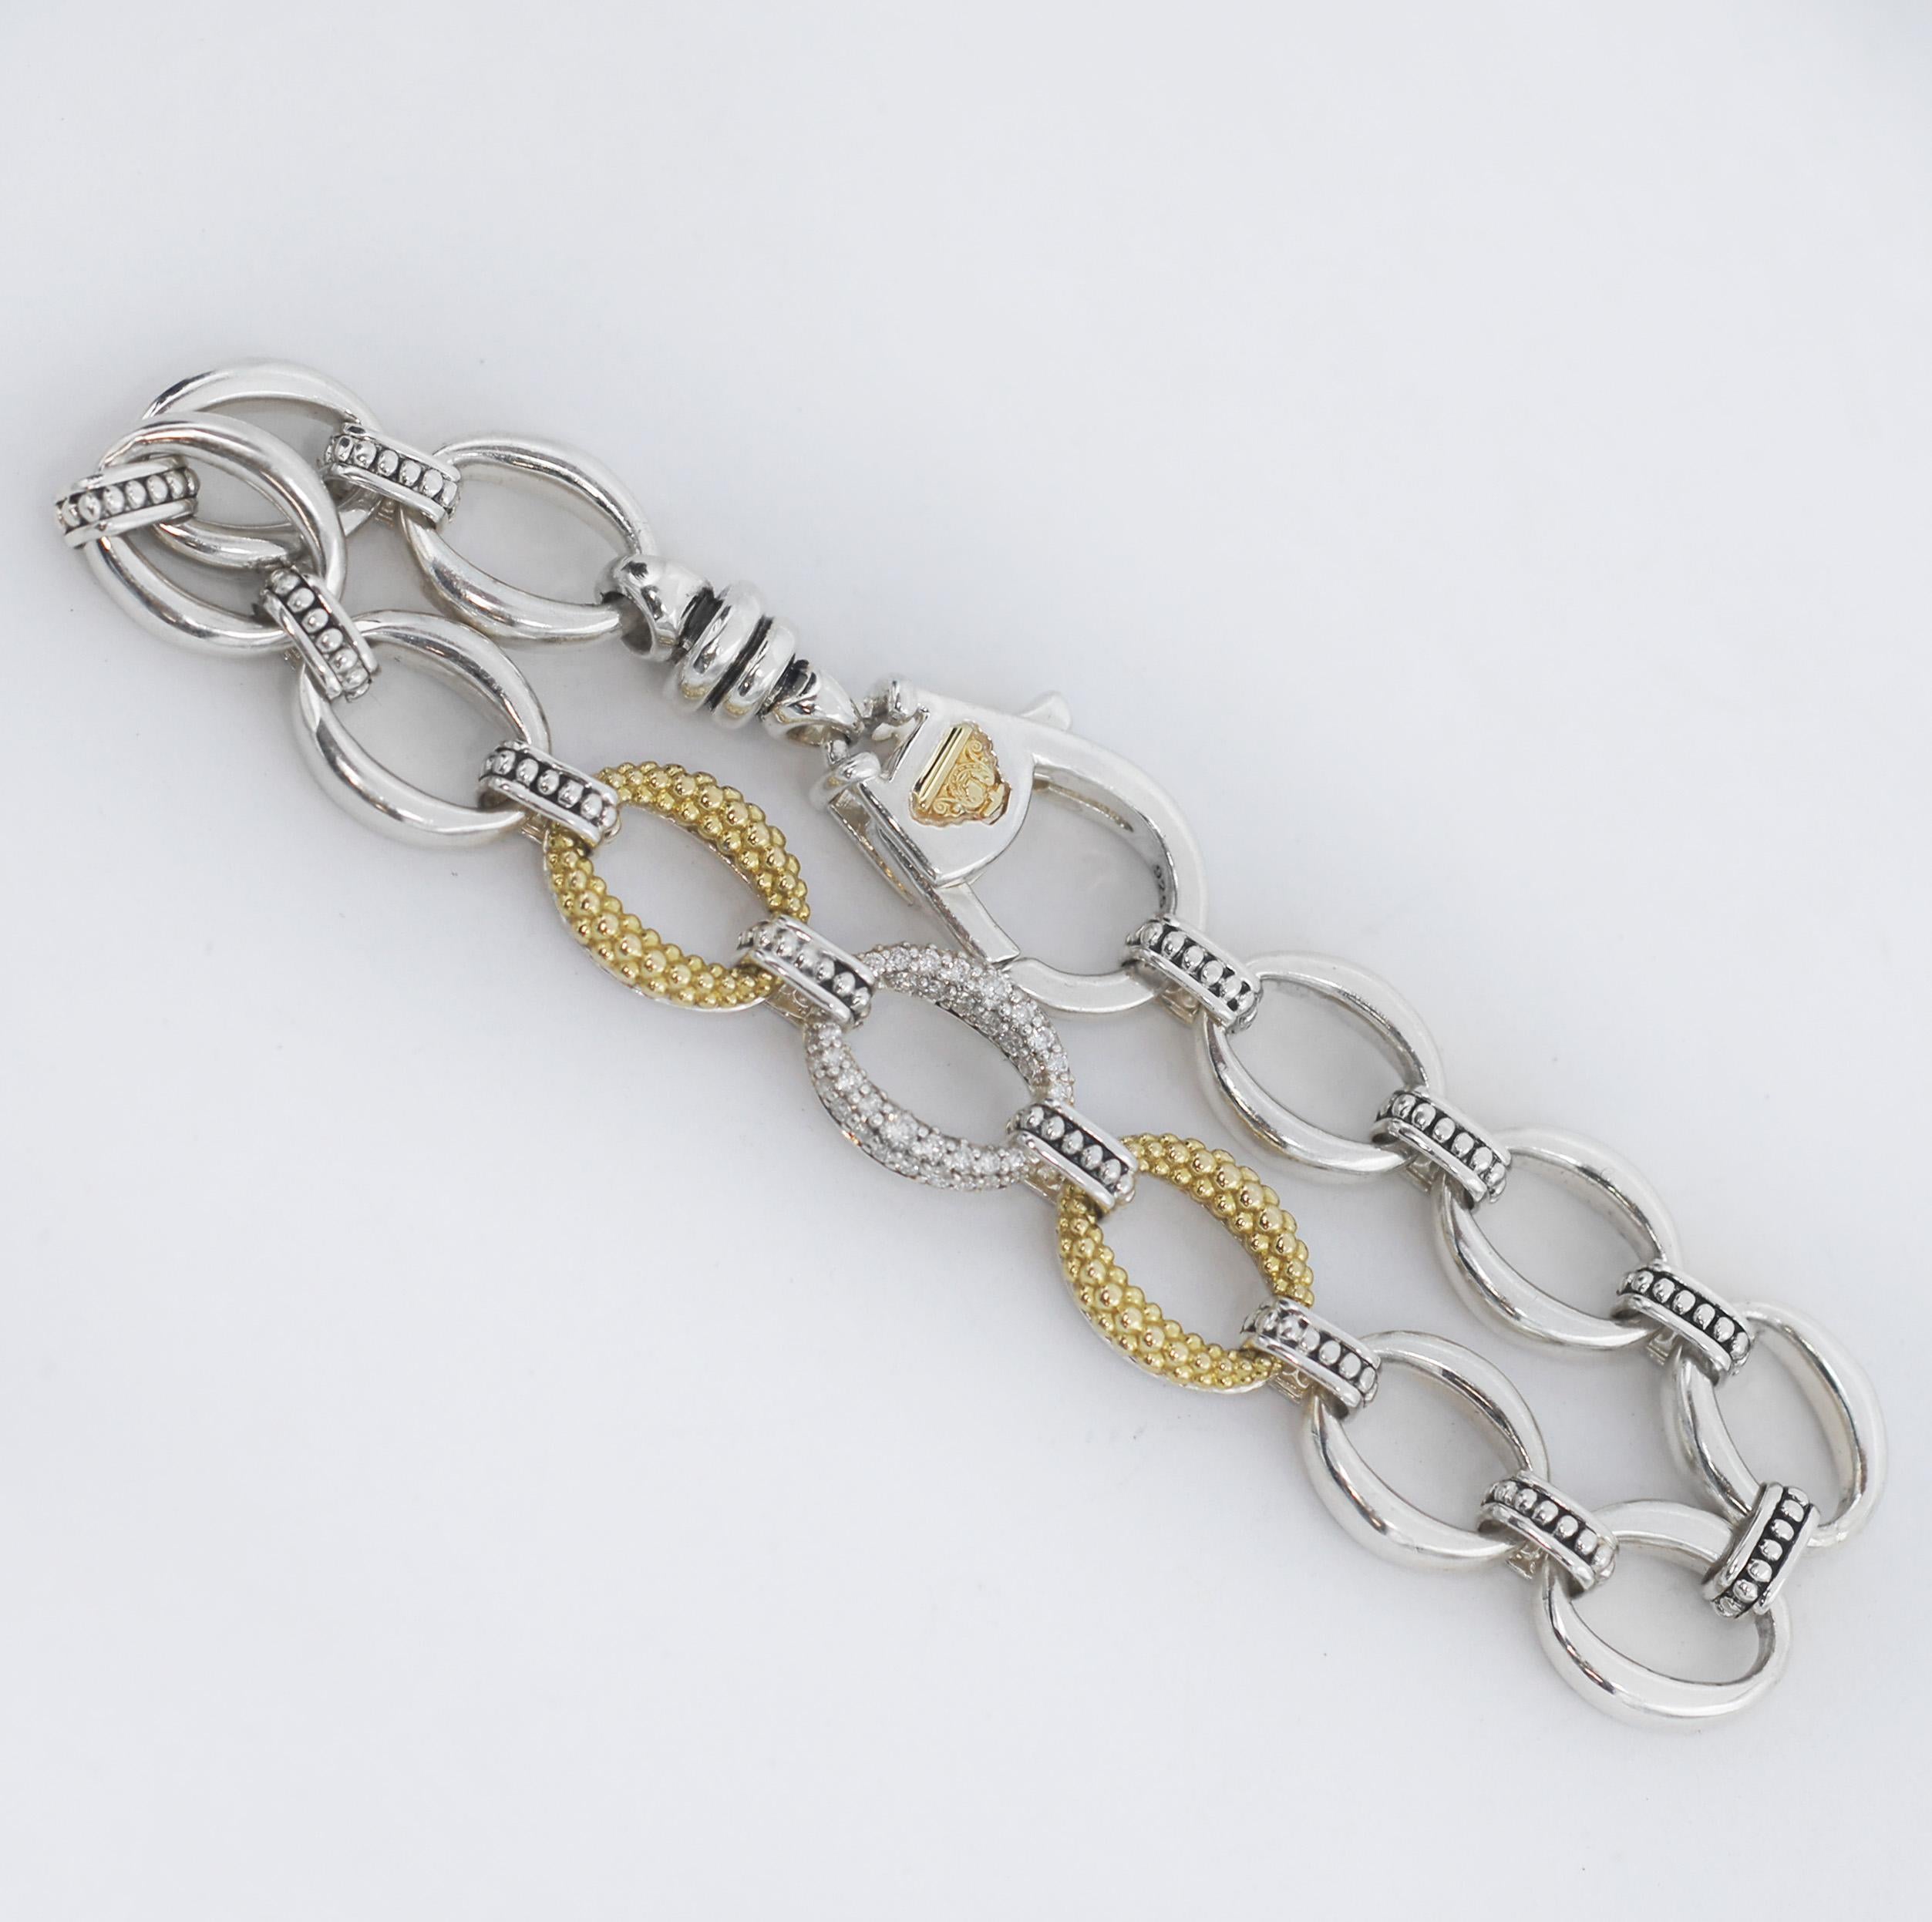 LAGOS
Sterling Silver & 18K Yellow Gold Lux Diamond Chain Bracelet
Diamonds, gold and sterling silver combine on this classic link bracelet, finished with a signature lobster clasp detailing the LAGOS crest. Ideal to pair with other designs in the